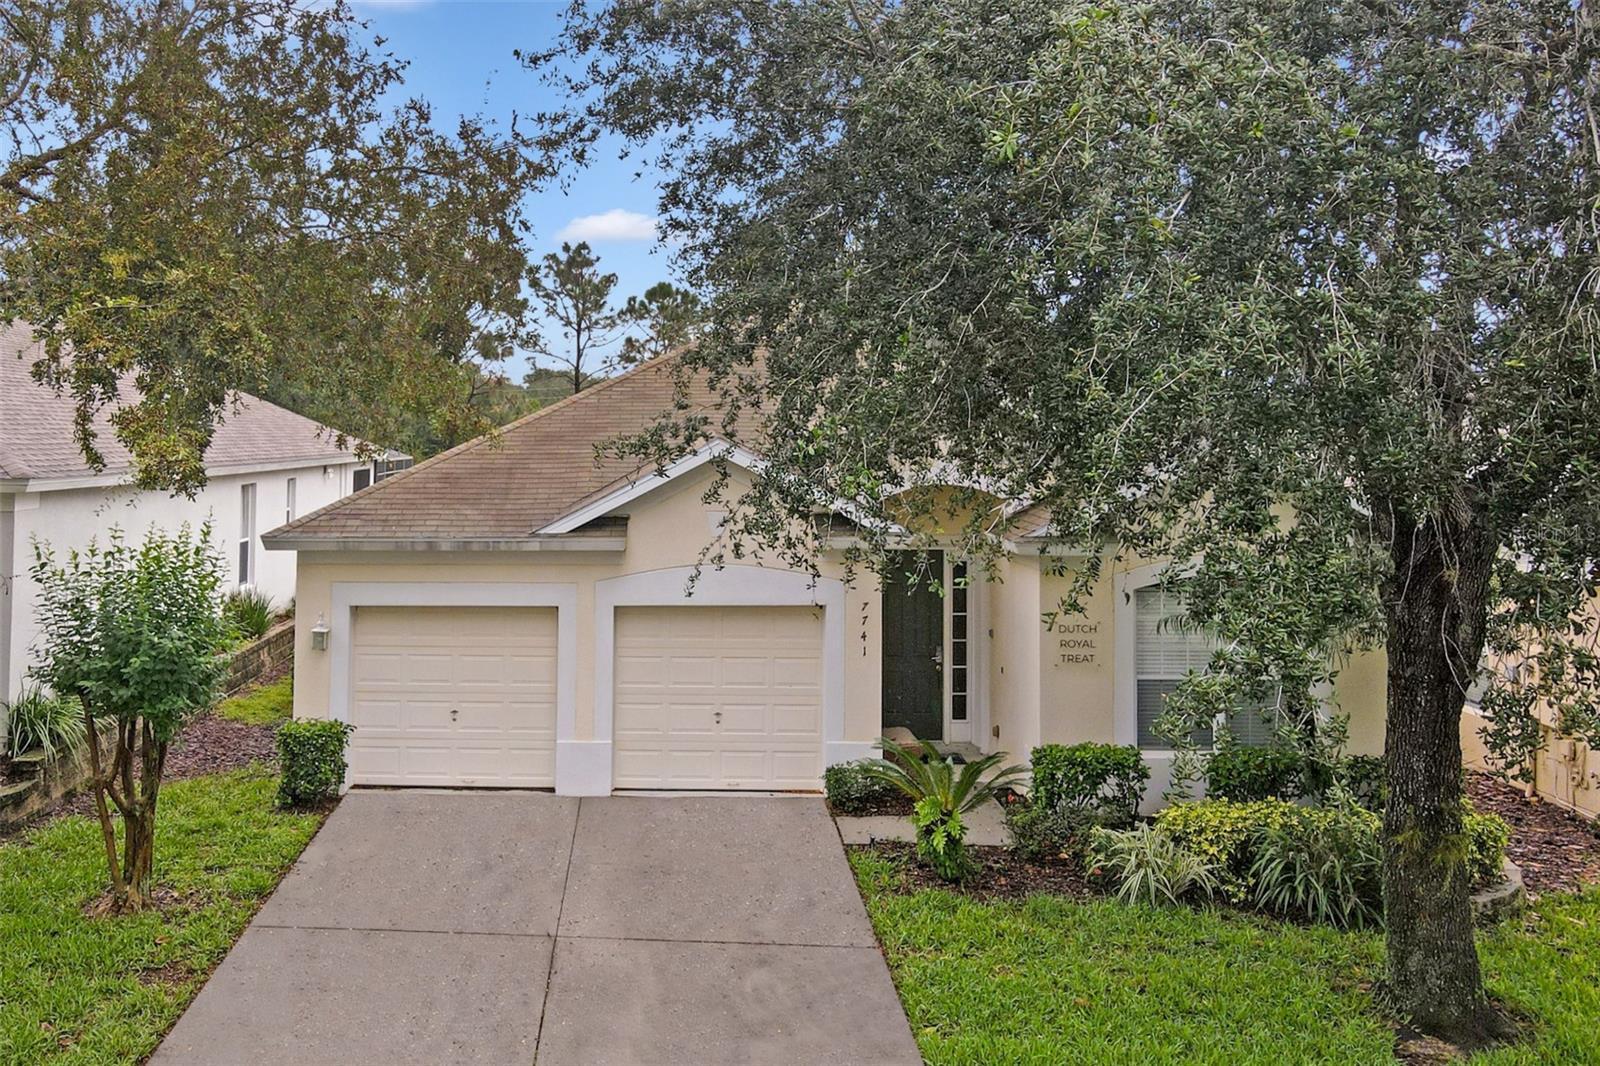 Photo one of 7741 Comrow St Kissimmee FL 34747 | MLS G5075395